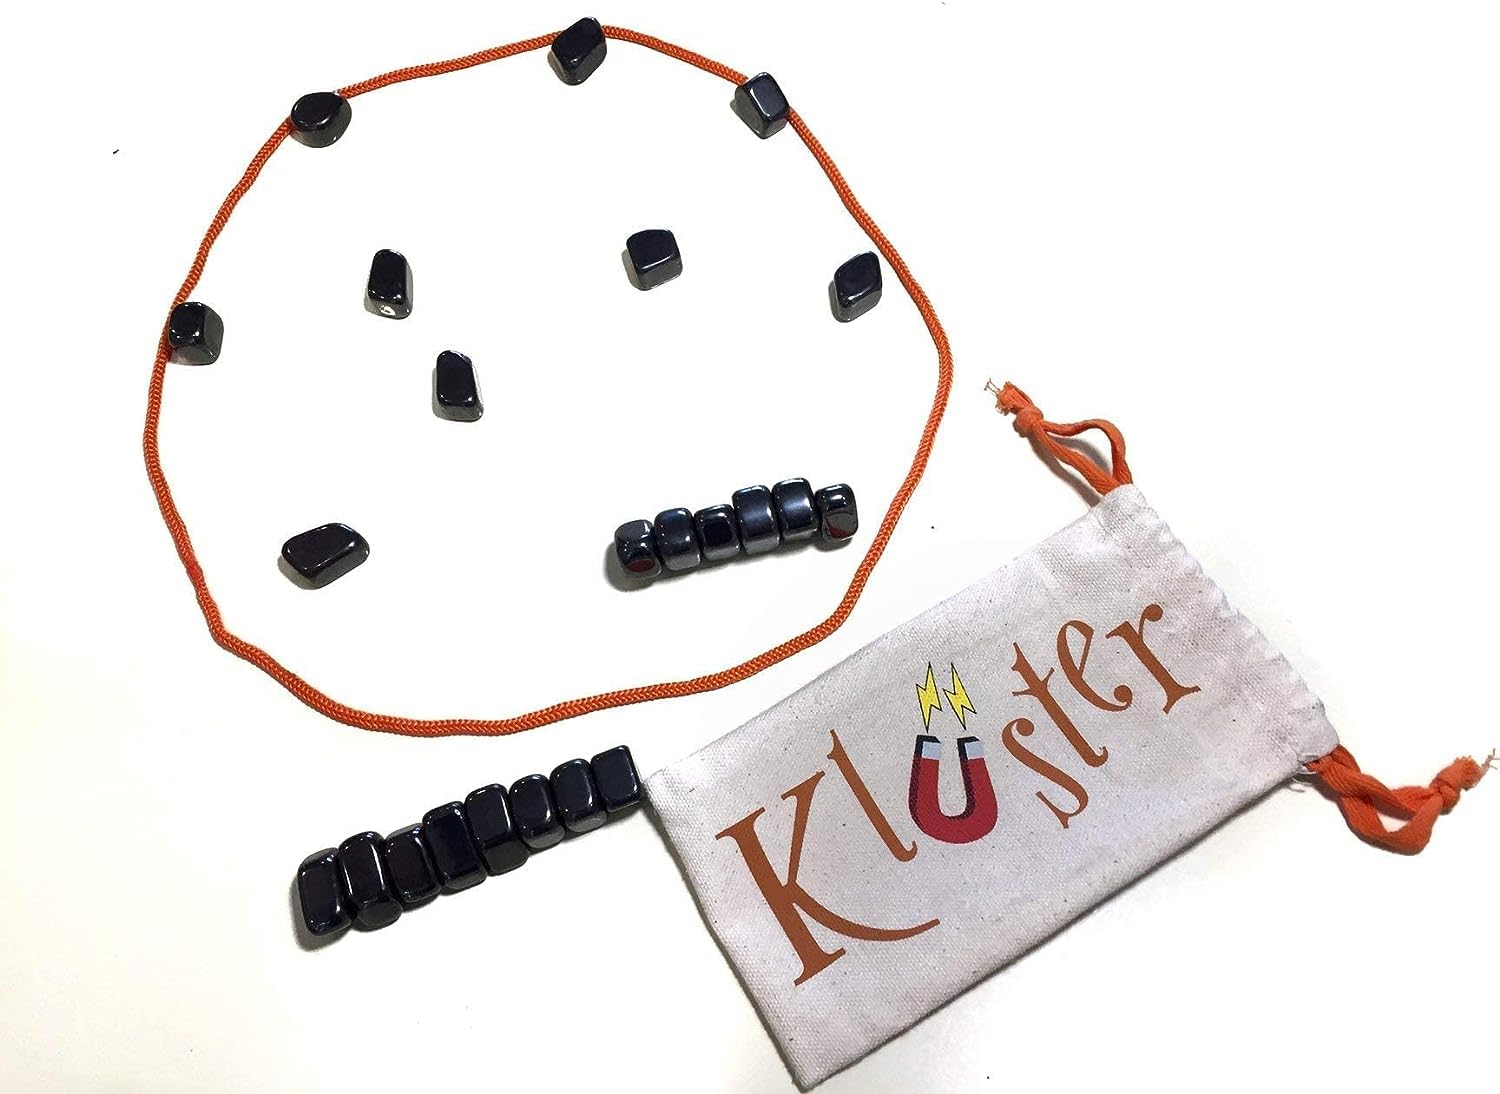 Kluster Magnets Game Stokly